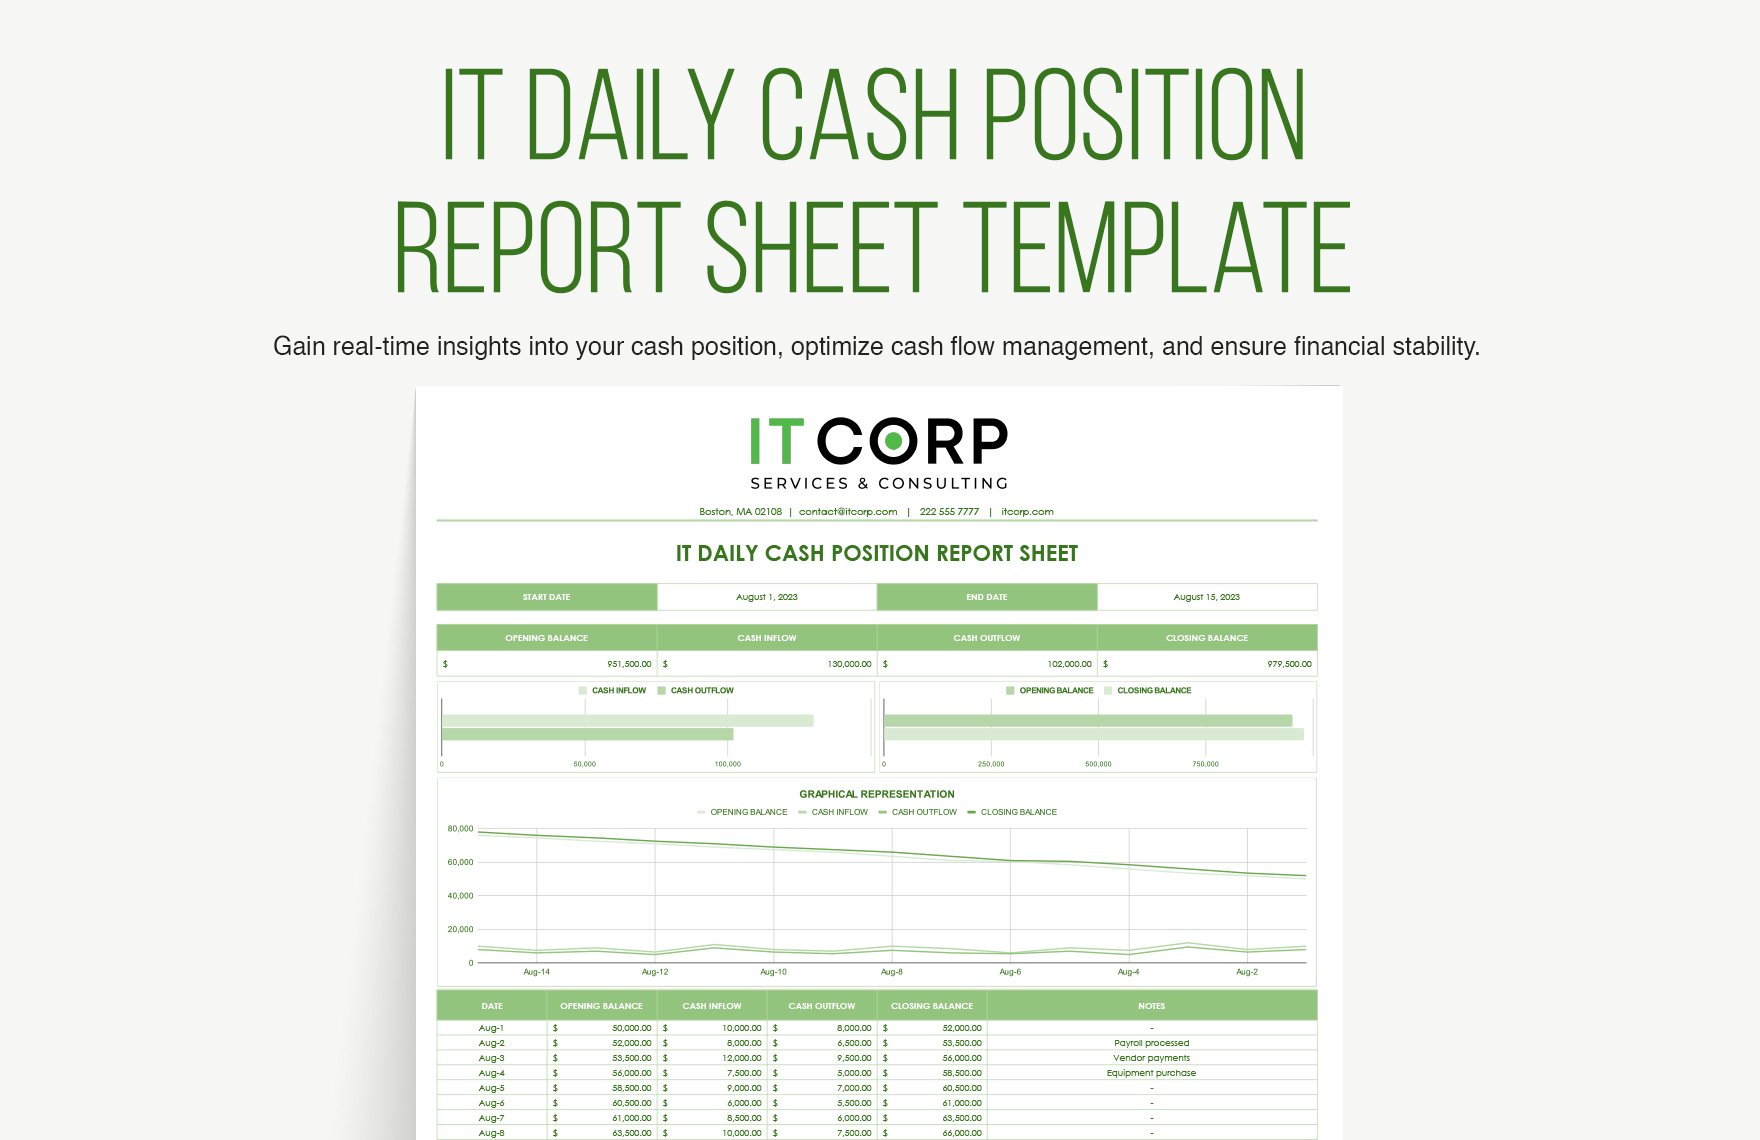 IT Daily Cash Position Report Sheet Template